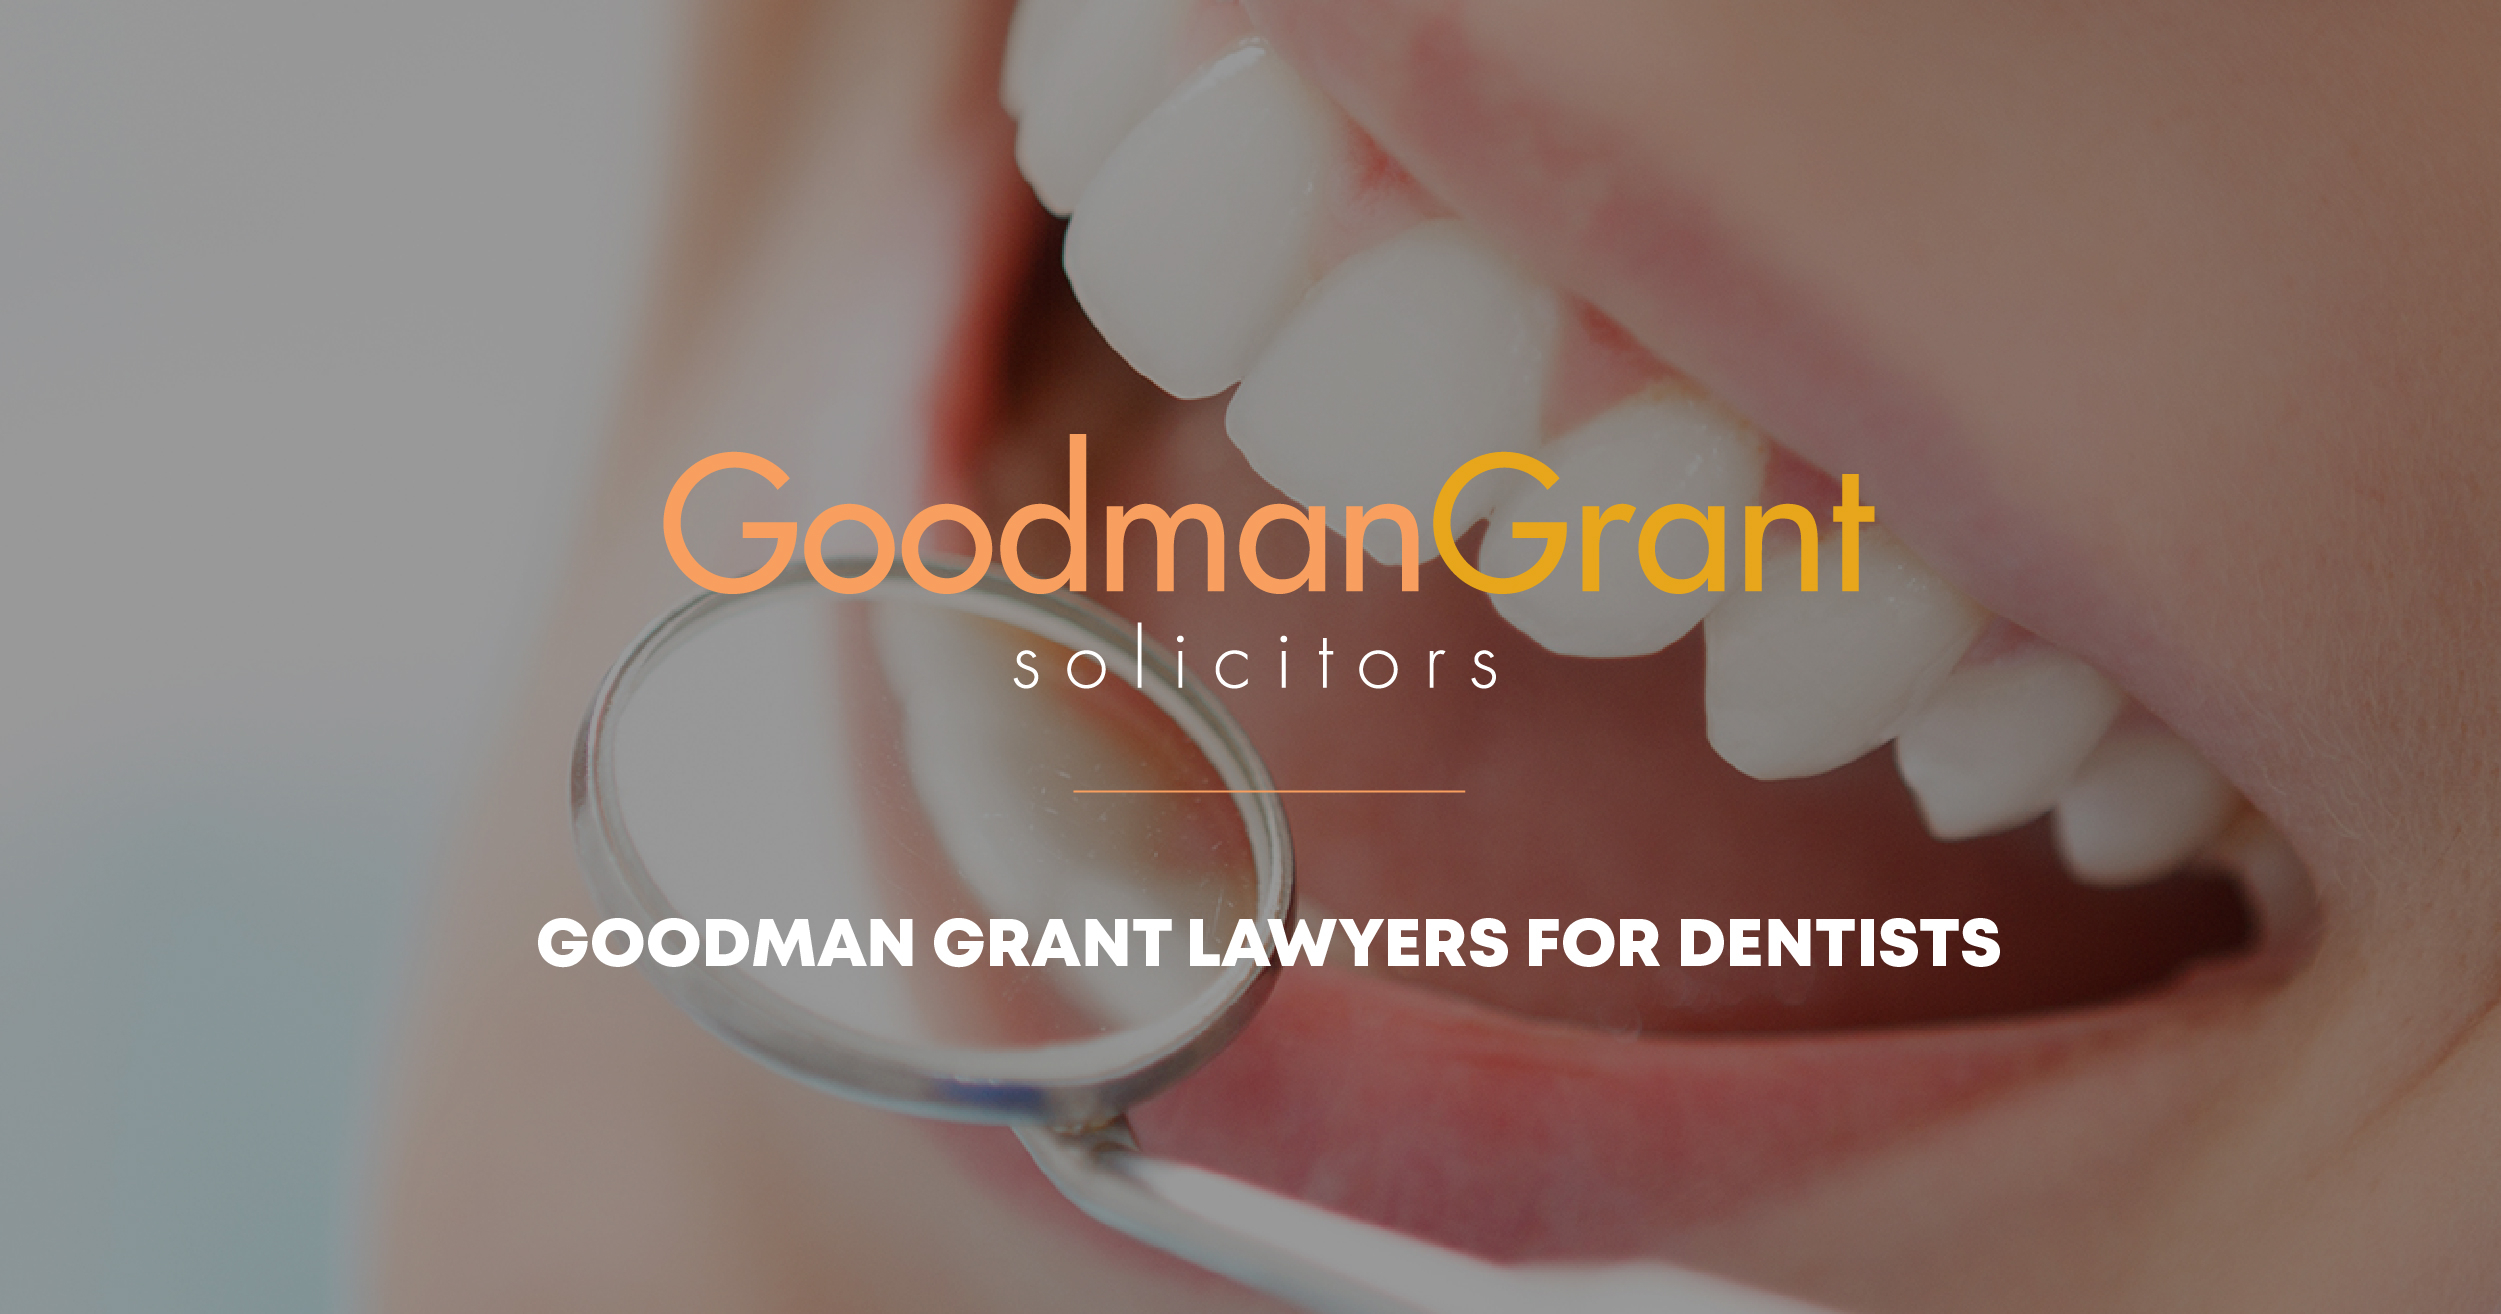 Dental Practice Partnership Agreement Lawyers For Dentists Goodman Grant Solicitors